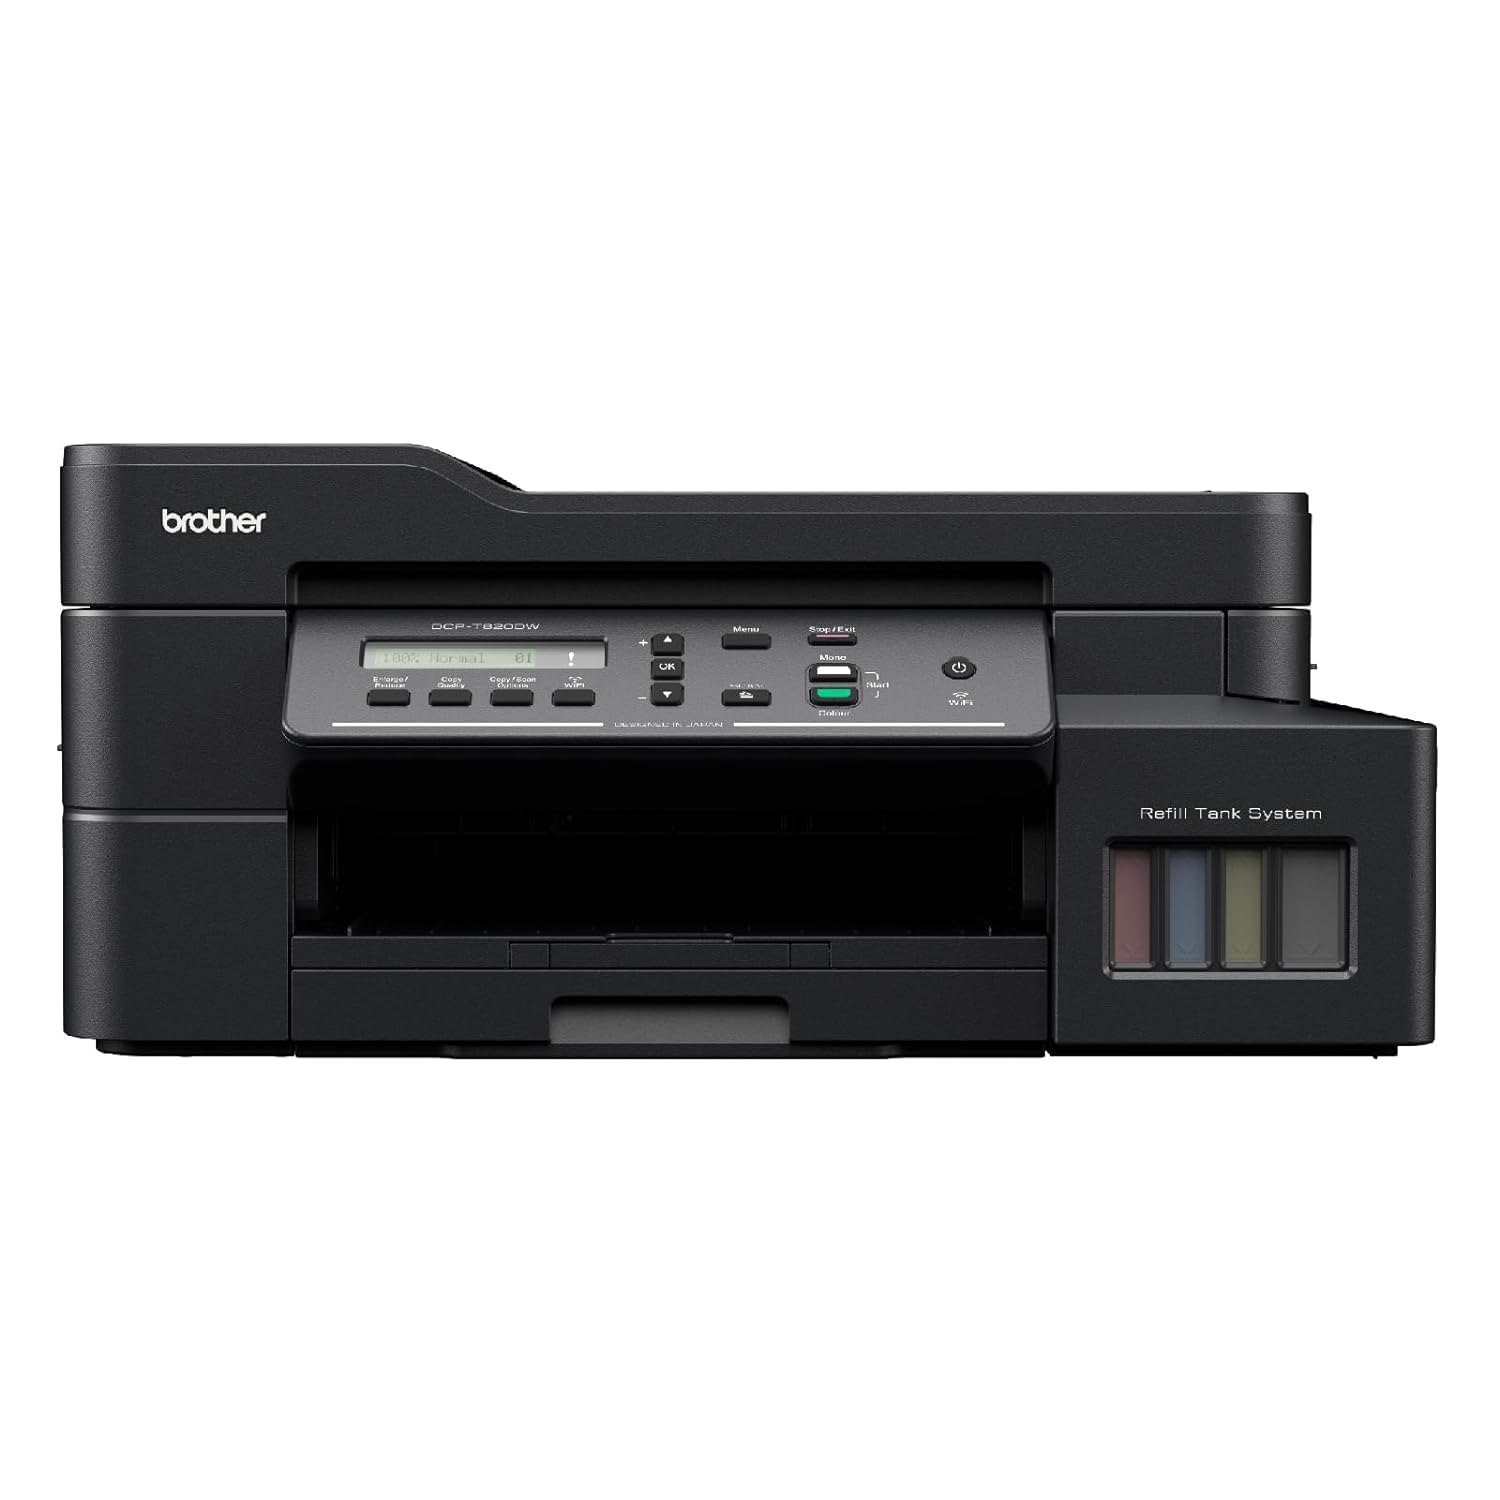 Printer Brother Ink Tank DCP-T820DW -Wi-Fi  &  Auto Duplex Color  Multifunction